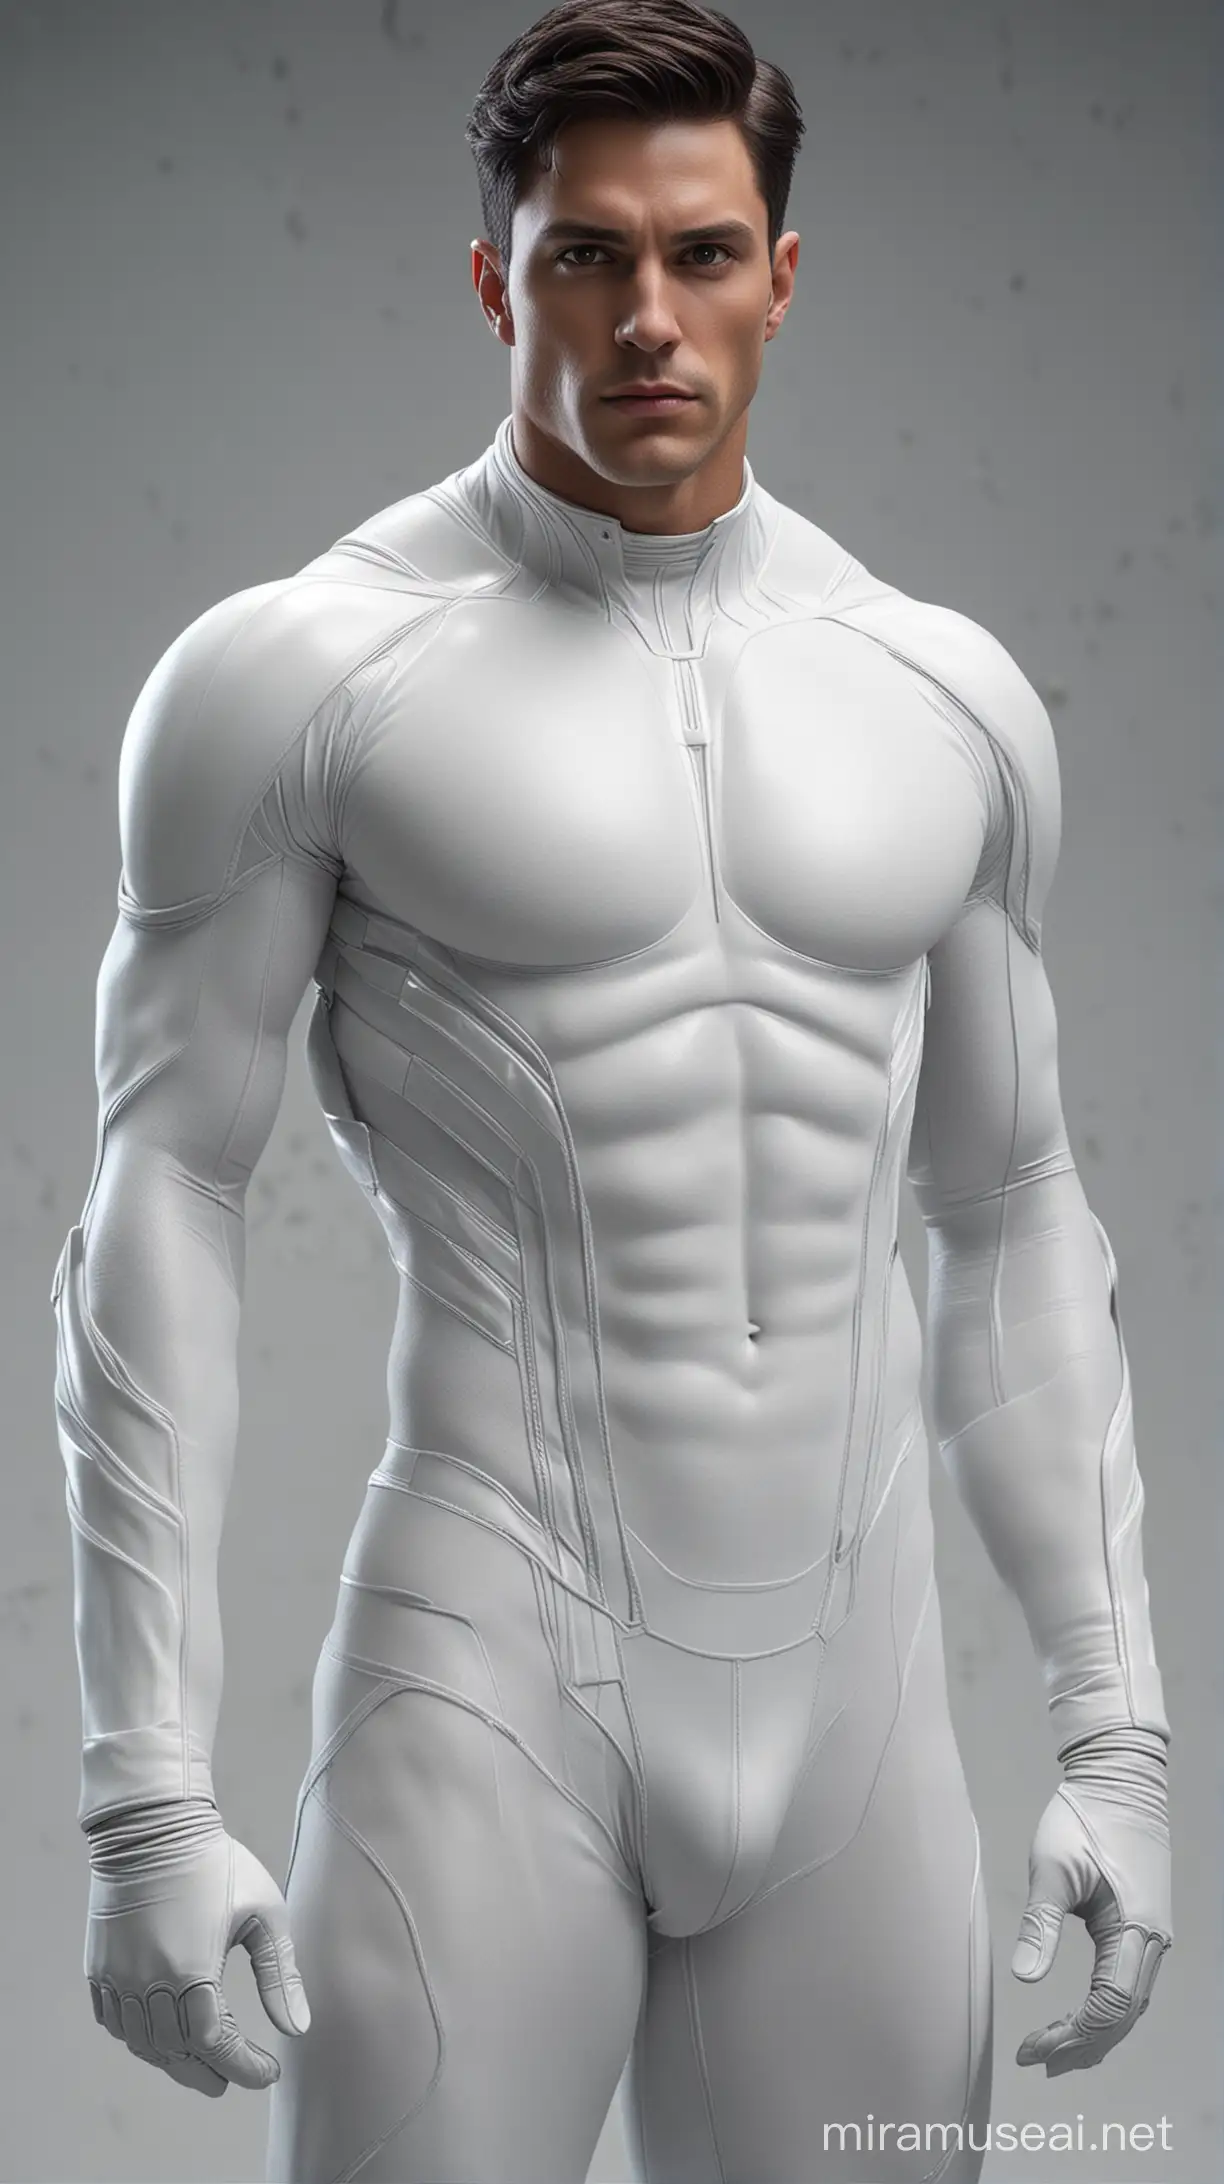 Full full body photorealistic An Alien handsome hunky masculine man from Krypton. Dark hair , Super Athletic body. translucent eyes and prominent cheekbones. Wearing a form-fitting white biomorphic bodysuit and gloves and white belt. Futuristic Kryptonian background. intricate details, beautifully shot, hyperrealistic, sharp focus, 64 megapixels, perfect composition, high contrast, cinematic, atmospherics cinematic 